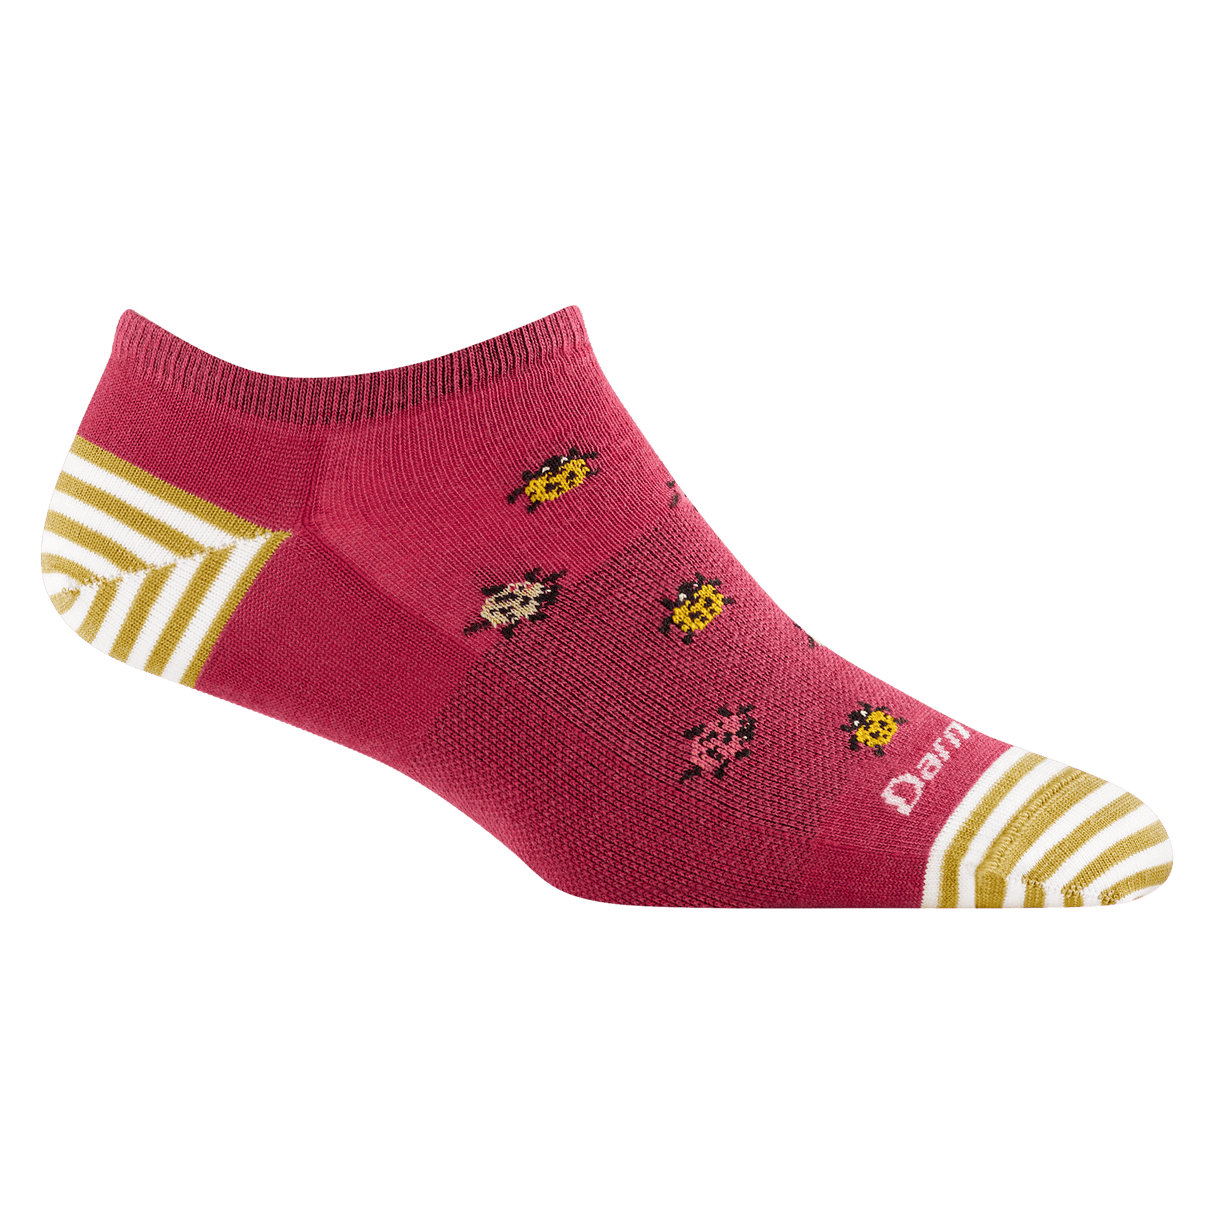 Darn Tough Womens Lucky Lady No Show Lightweight Lifestyle Socks  -  Small / Cranberry